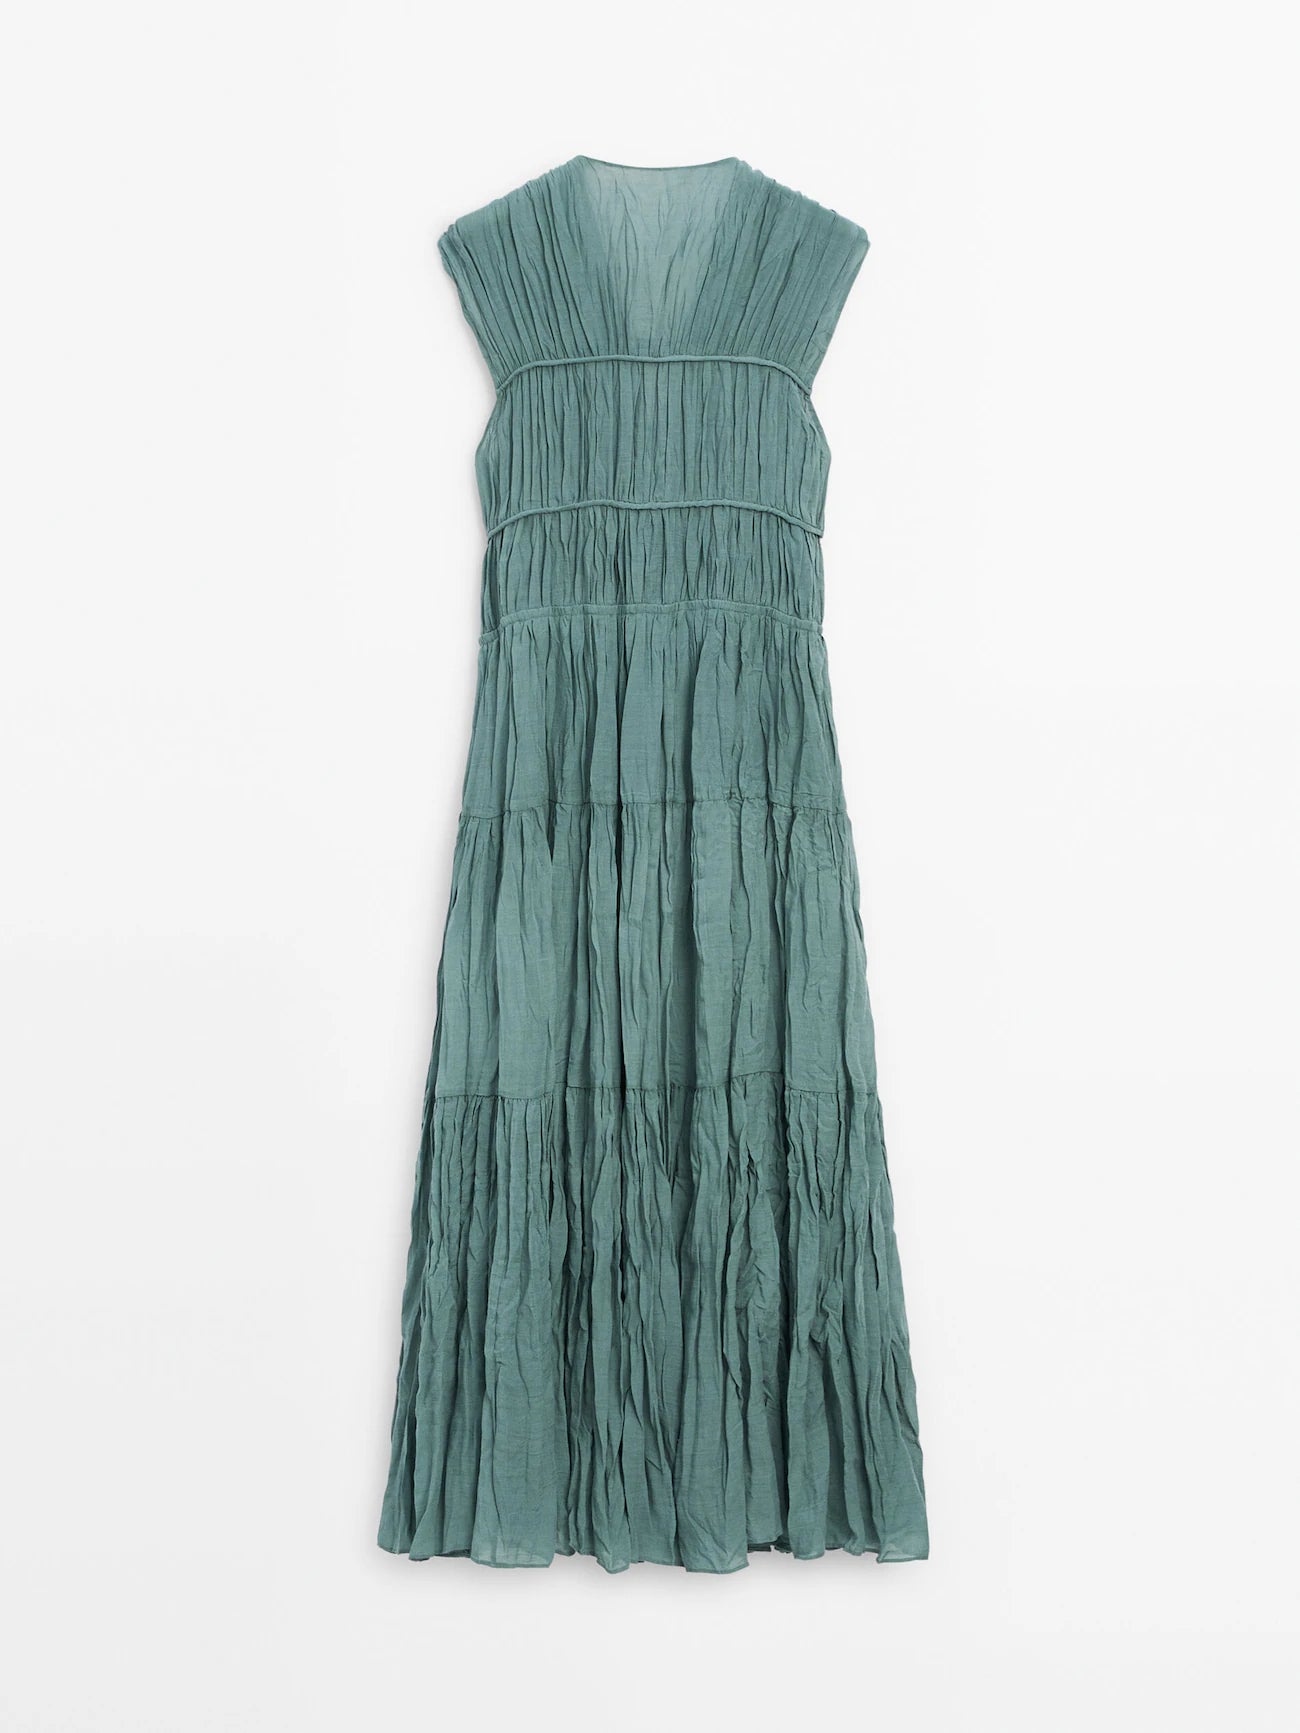 Pleated dress with tie details